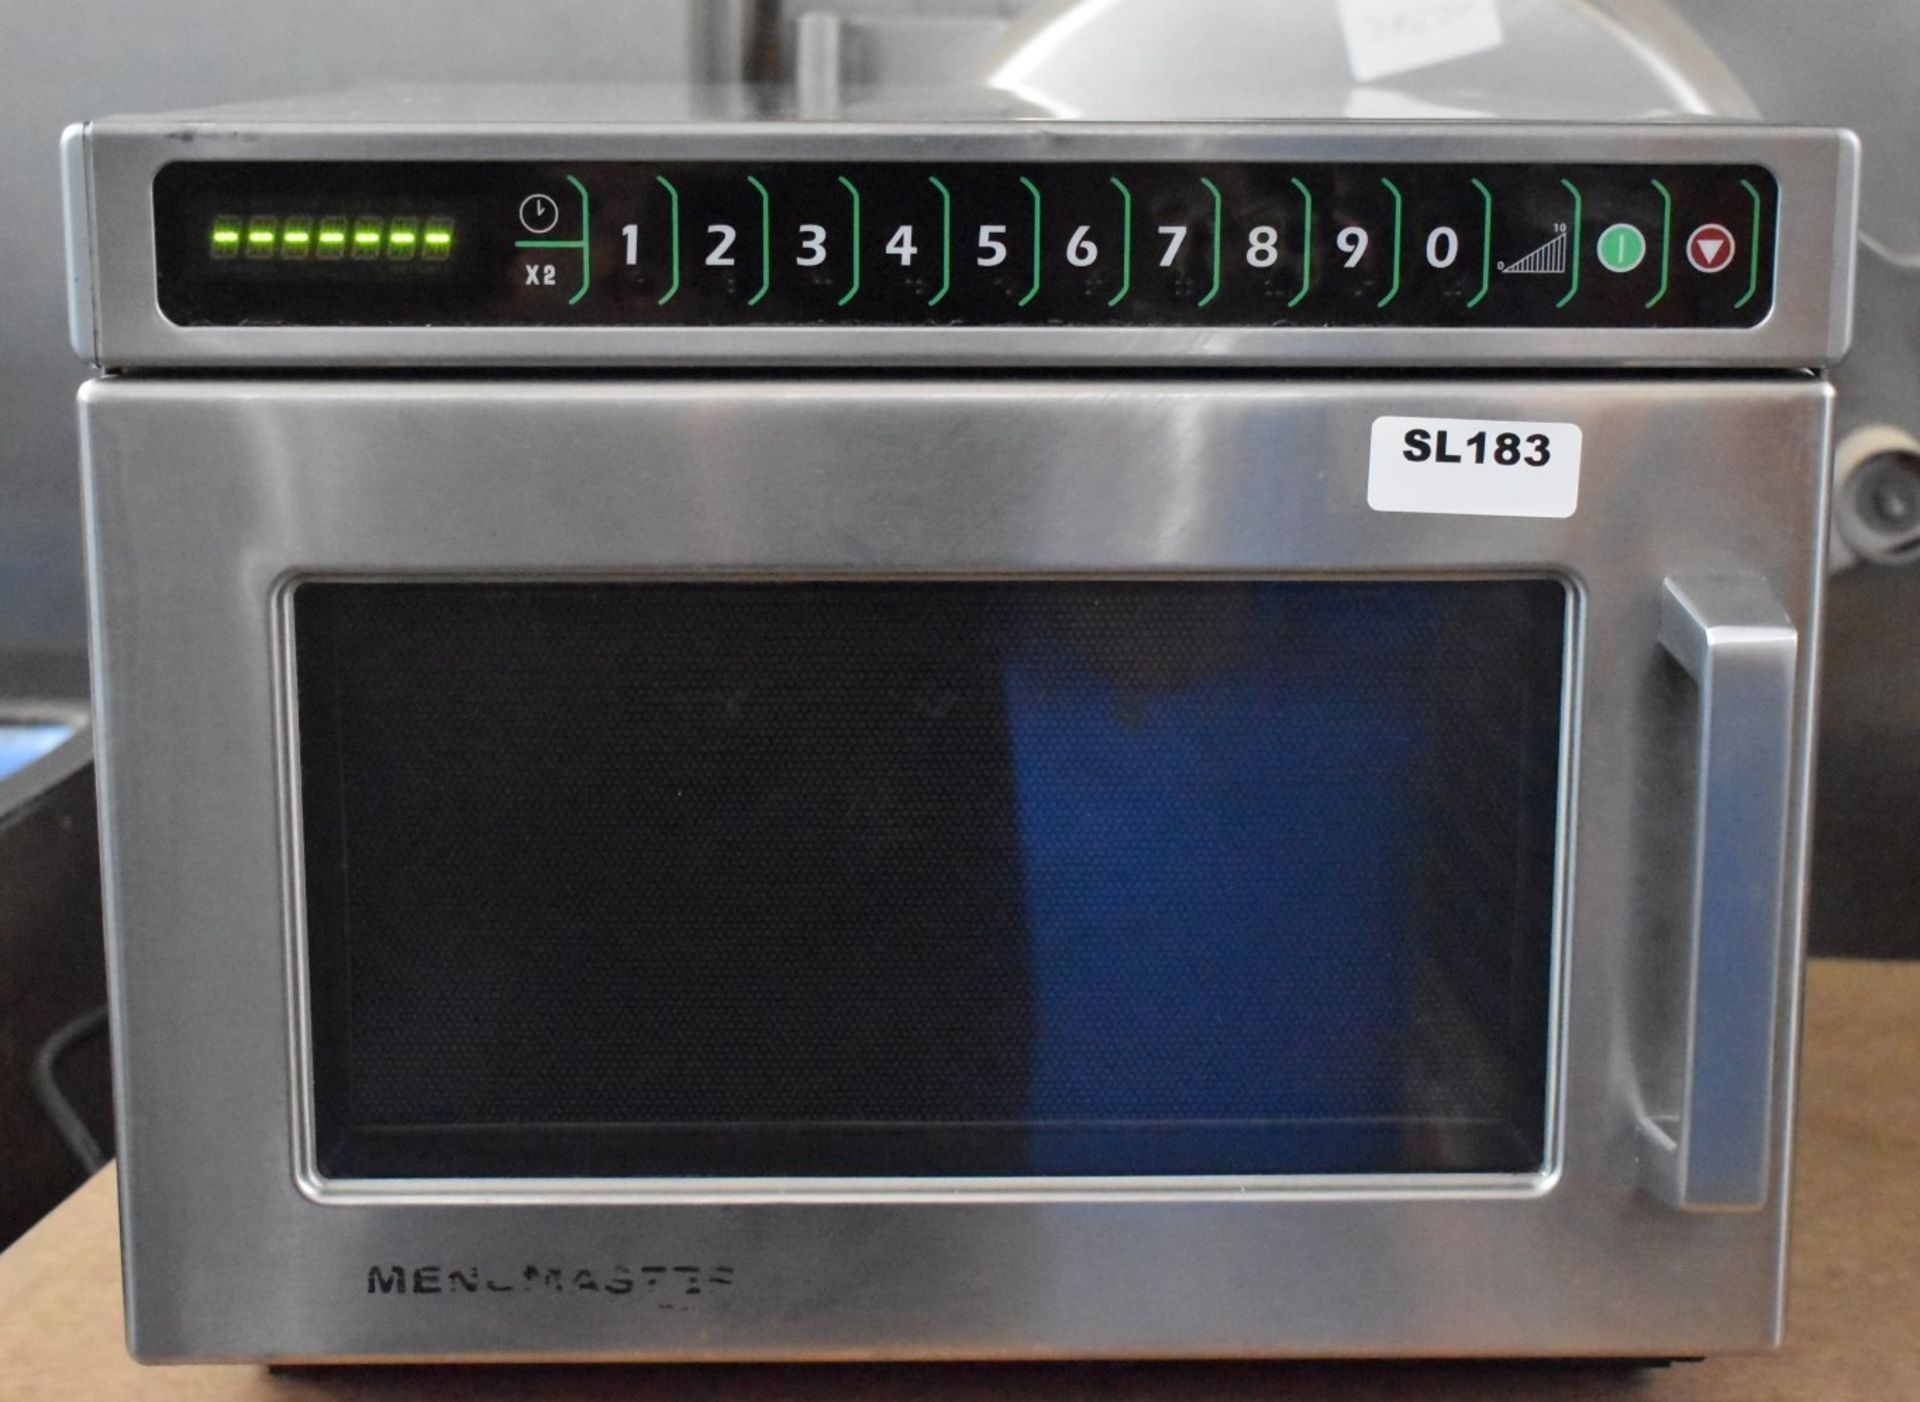 1 x Menumaster Commercial Microwave Oven - Model DEC14E2U - 1.4kW, 13A, 17Ltr - Recently Removed